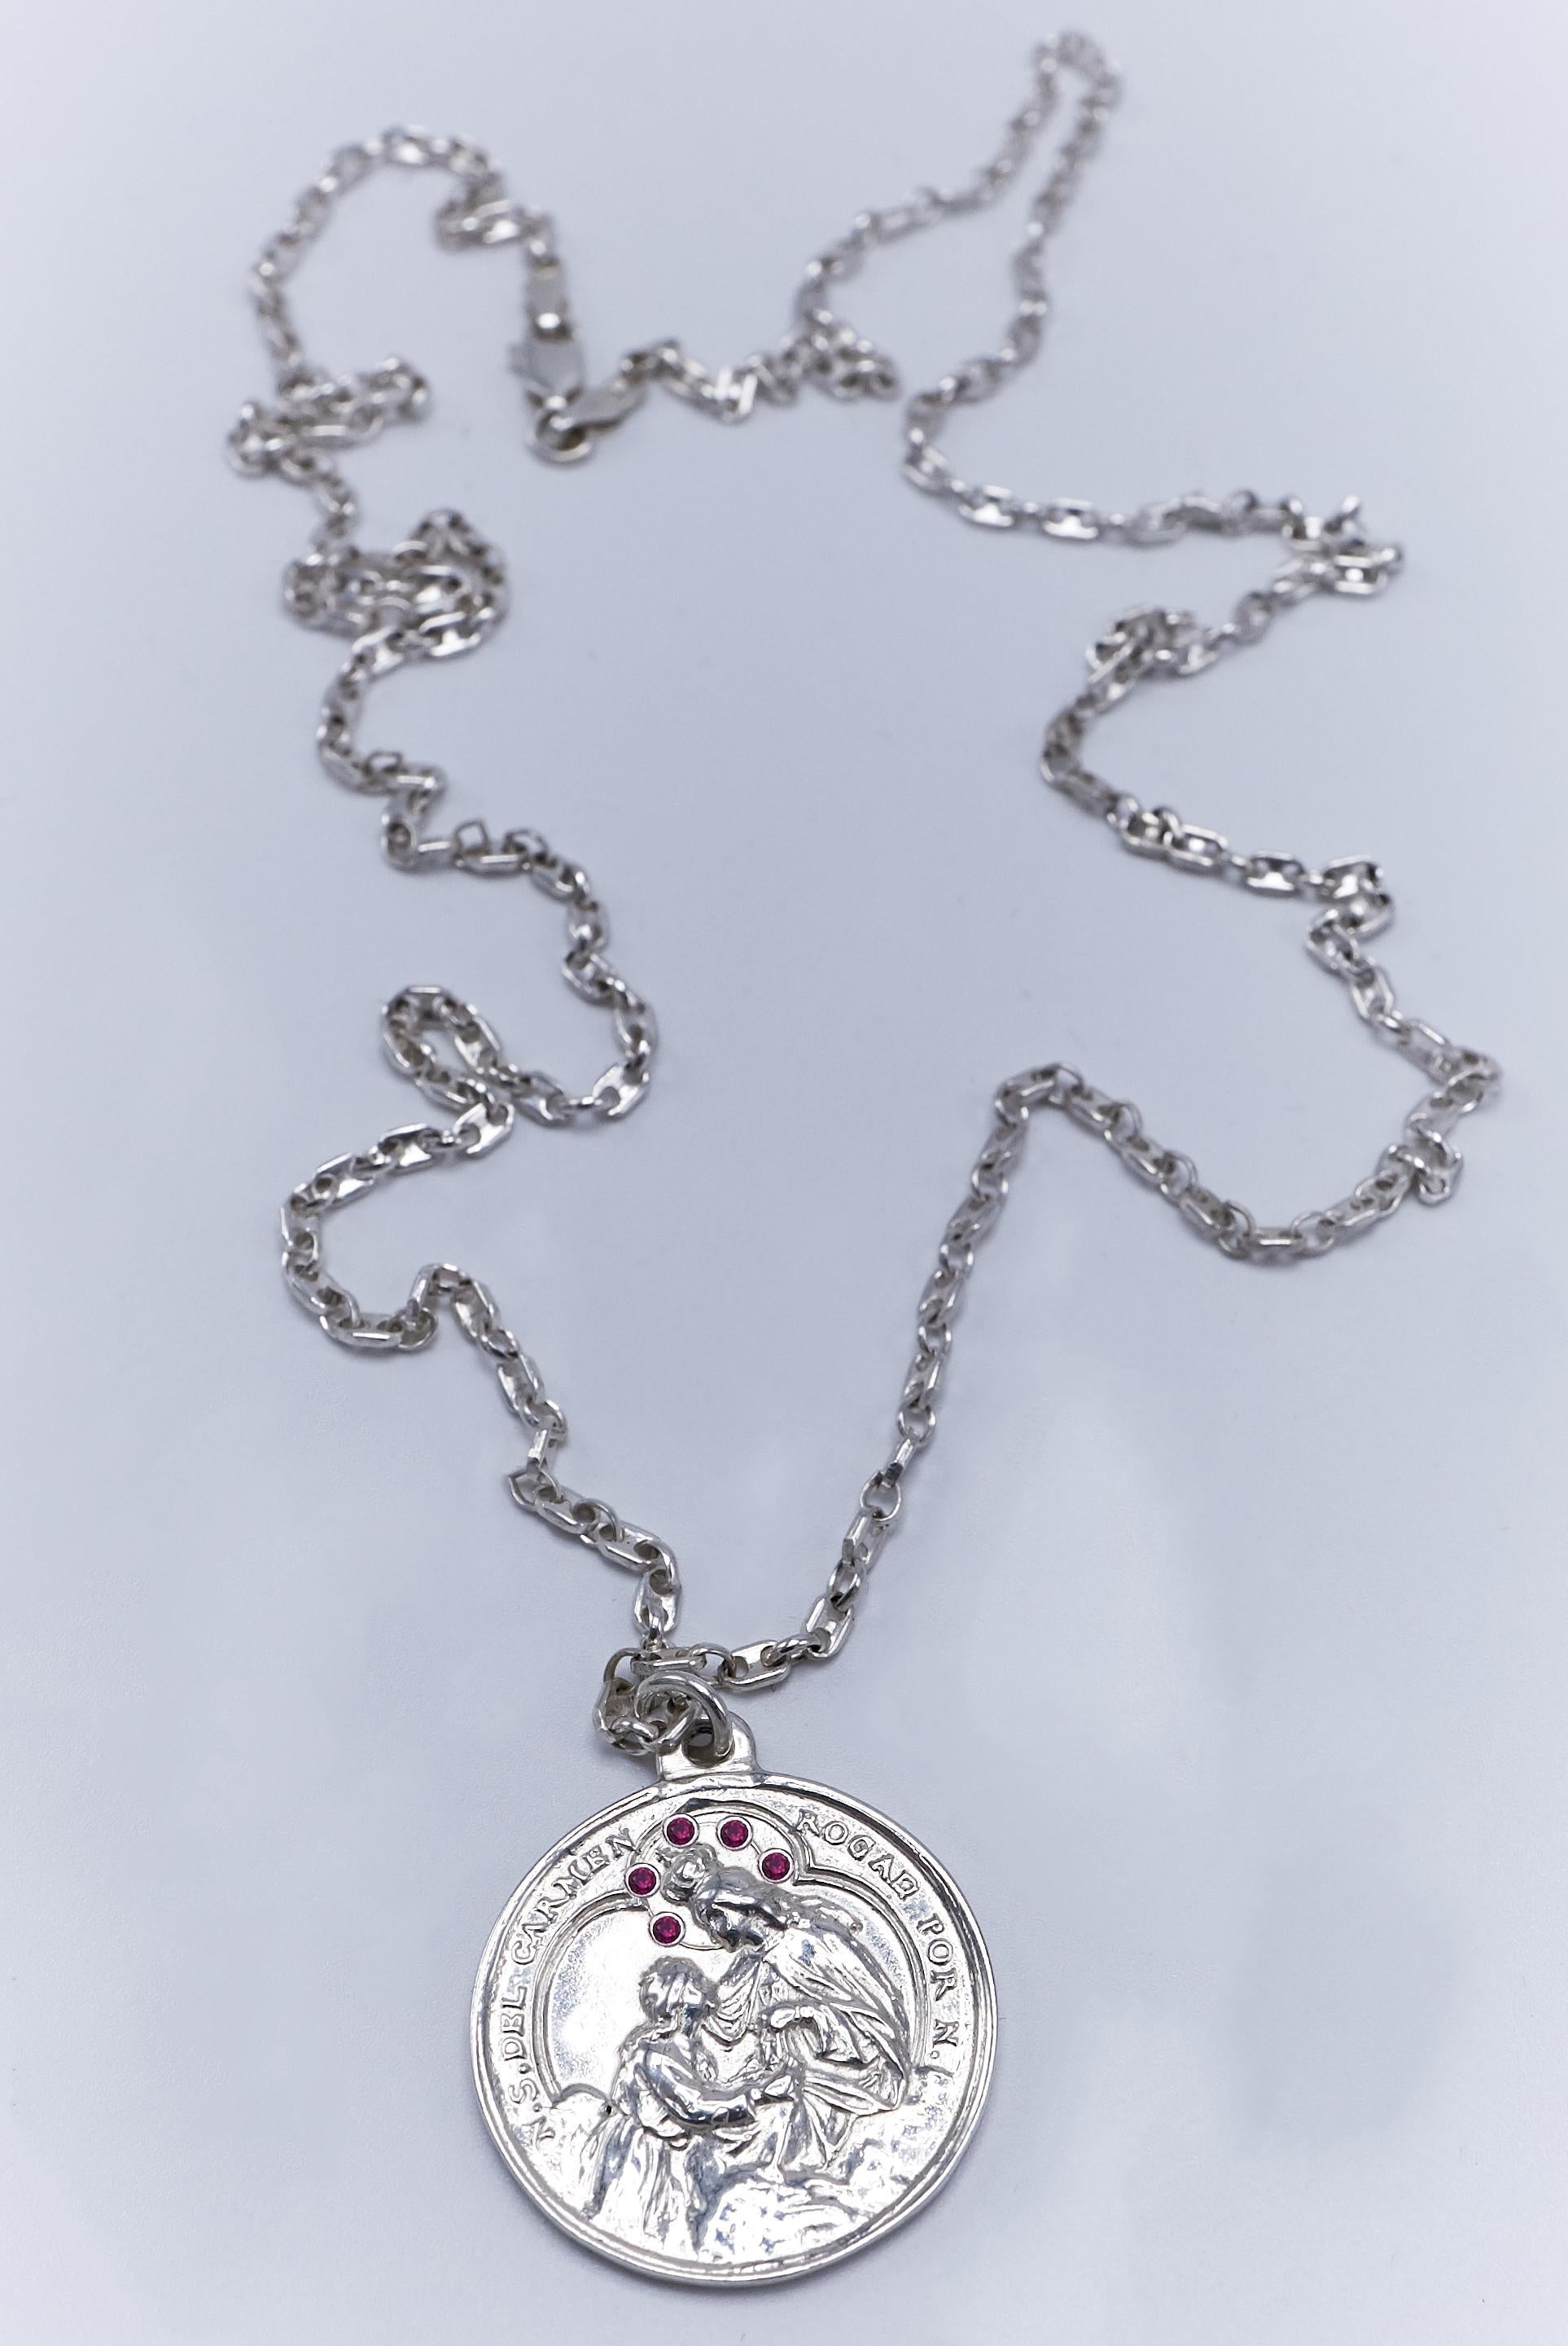 Contemporary Medal Chain Necklace Miraculous Virgin Mary Ruby Silver J Dauphin For Sale